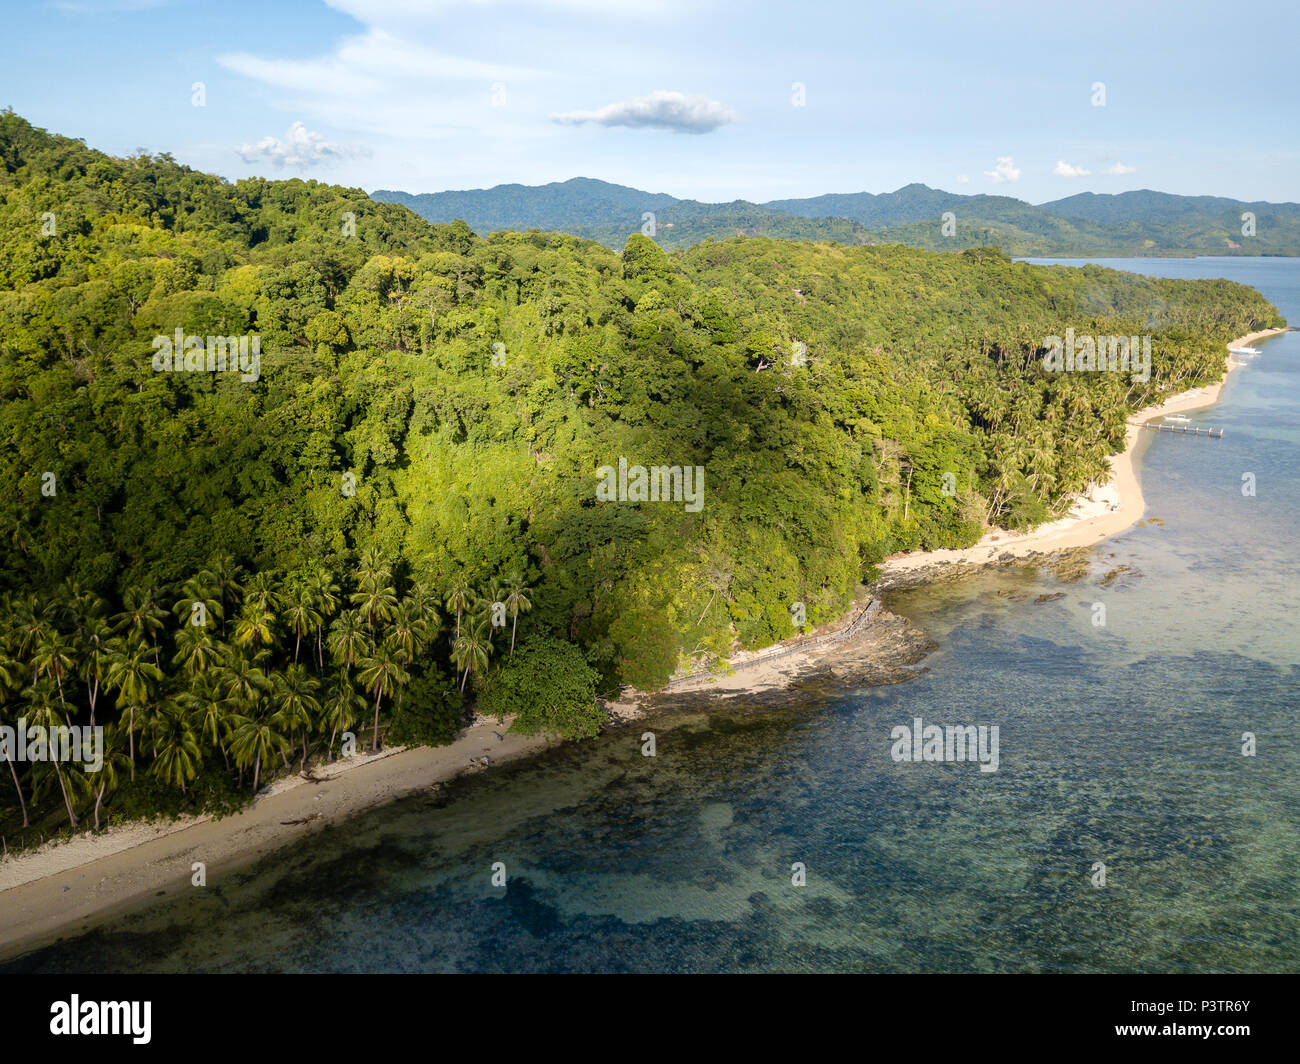 Aerial drone view of a beautiful tropical bay with reef, sandy beach and jungle scenery Stock Photo